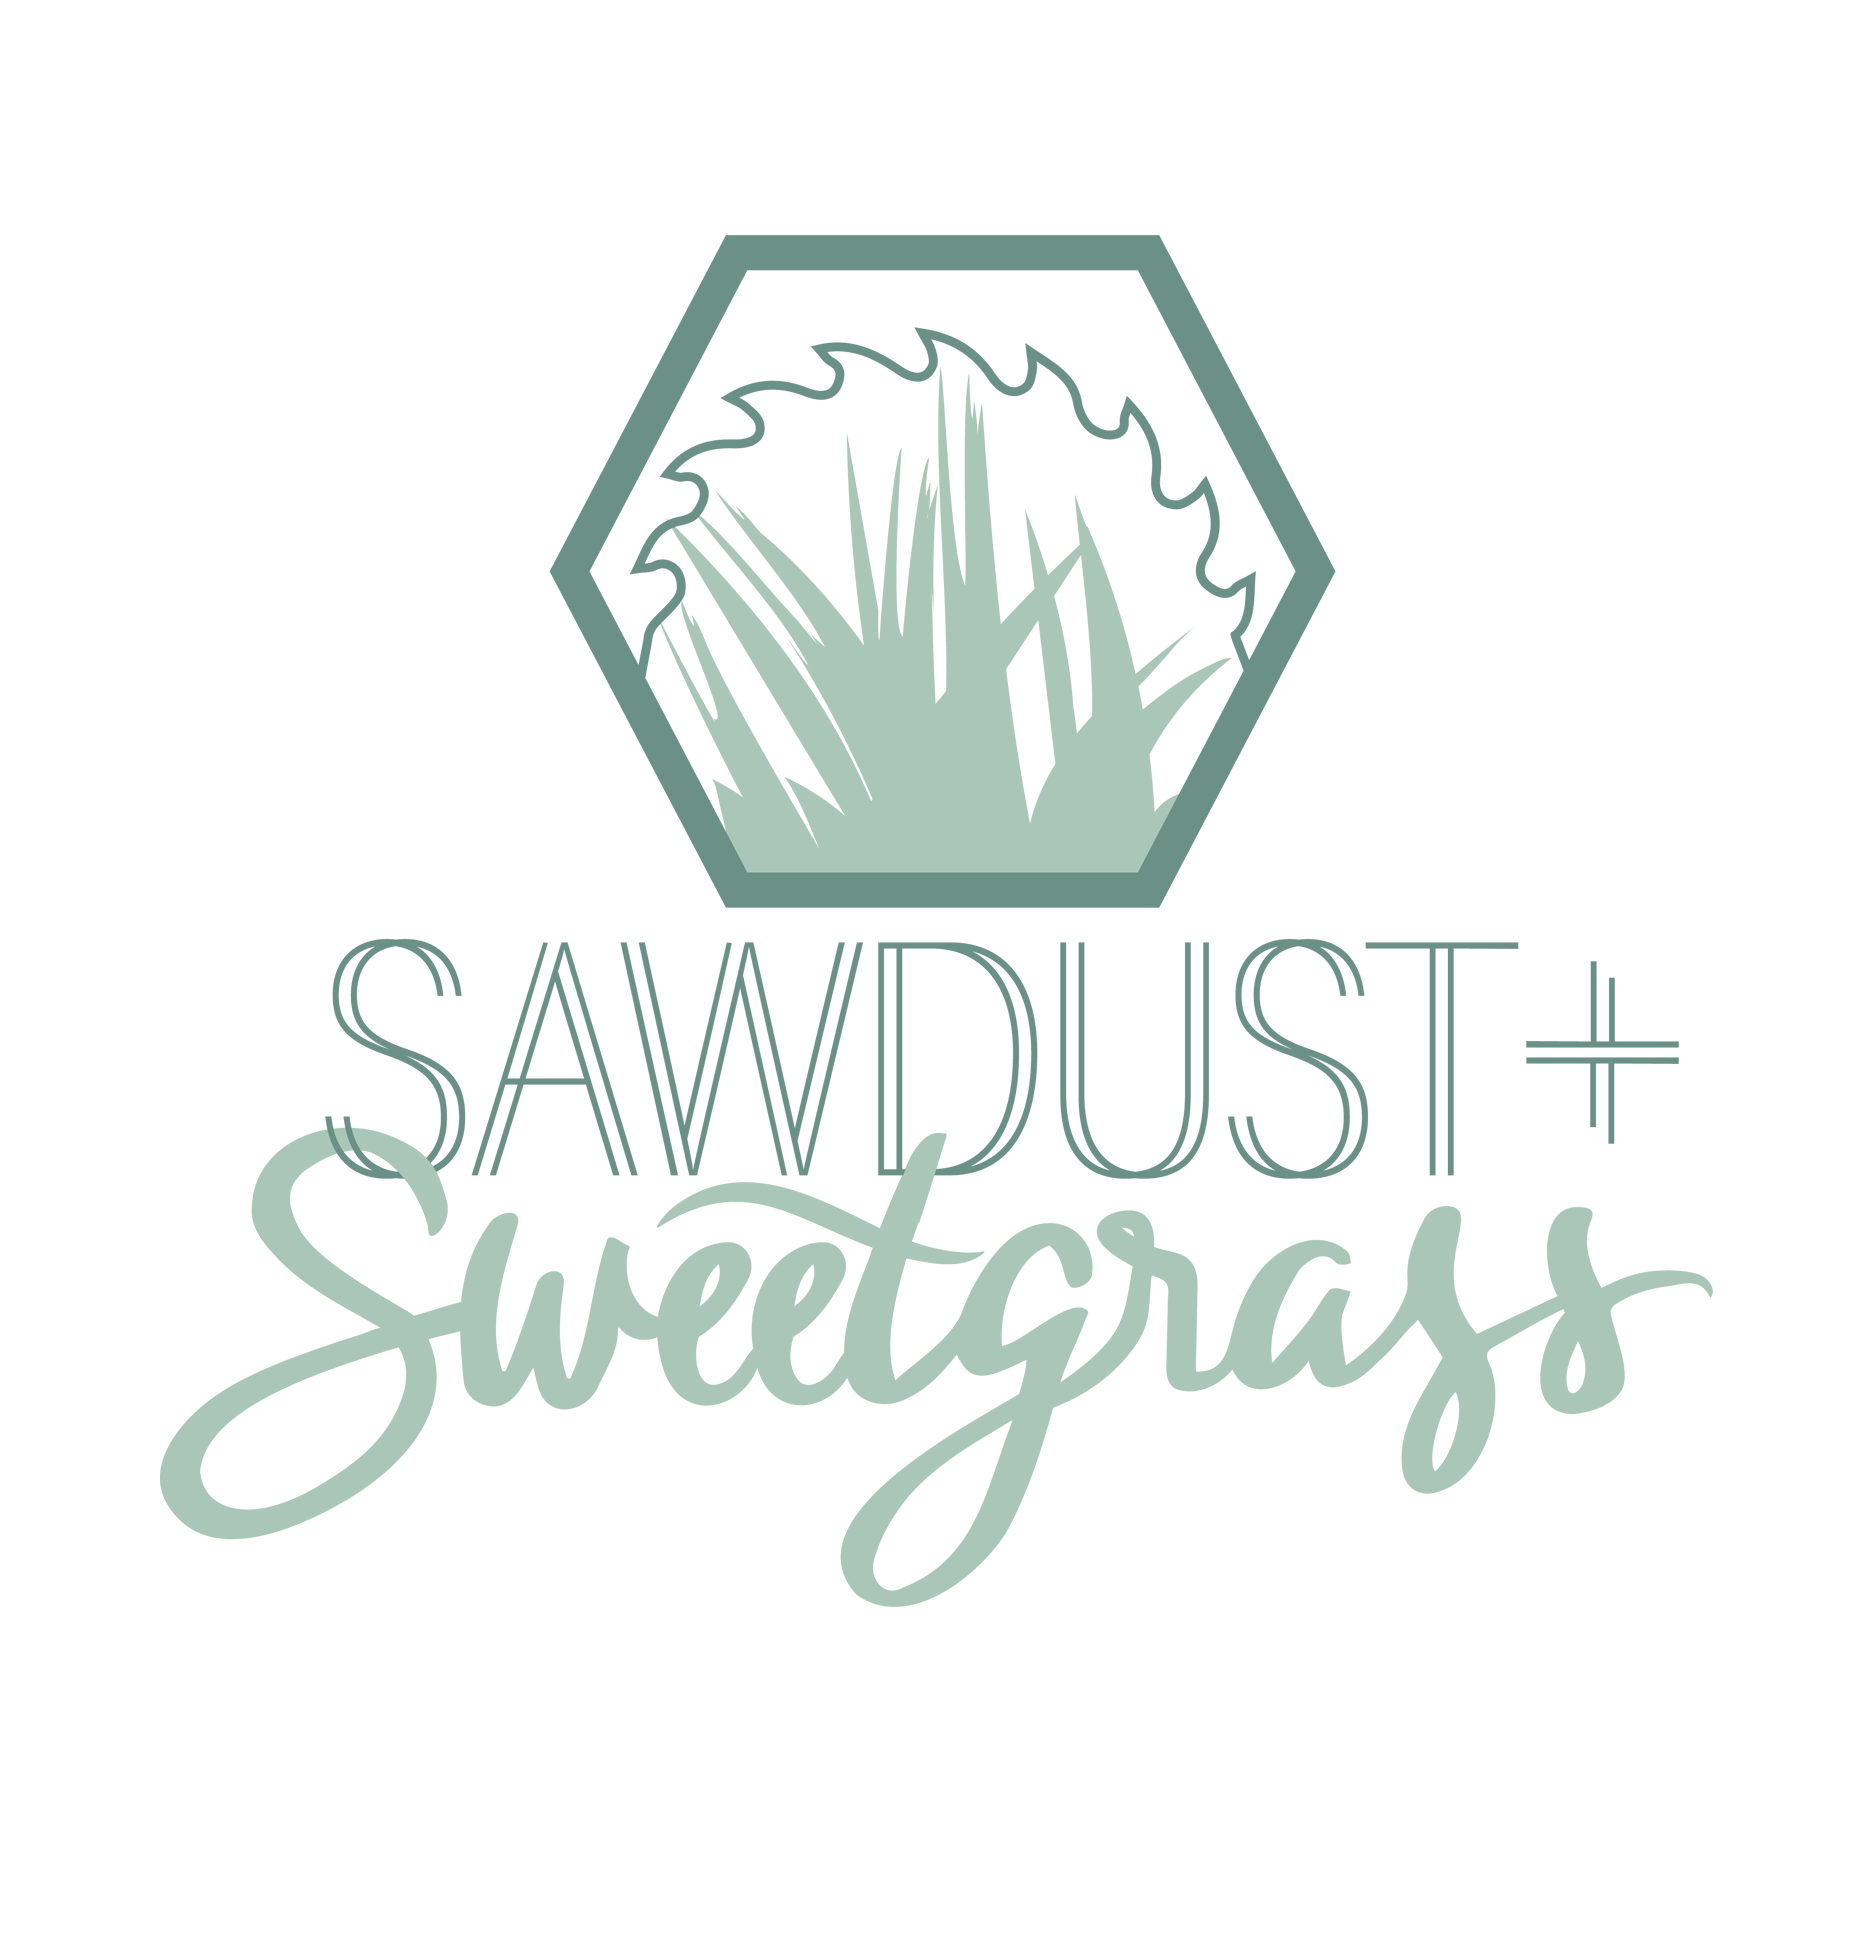 Sawdust and Sweetgrass